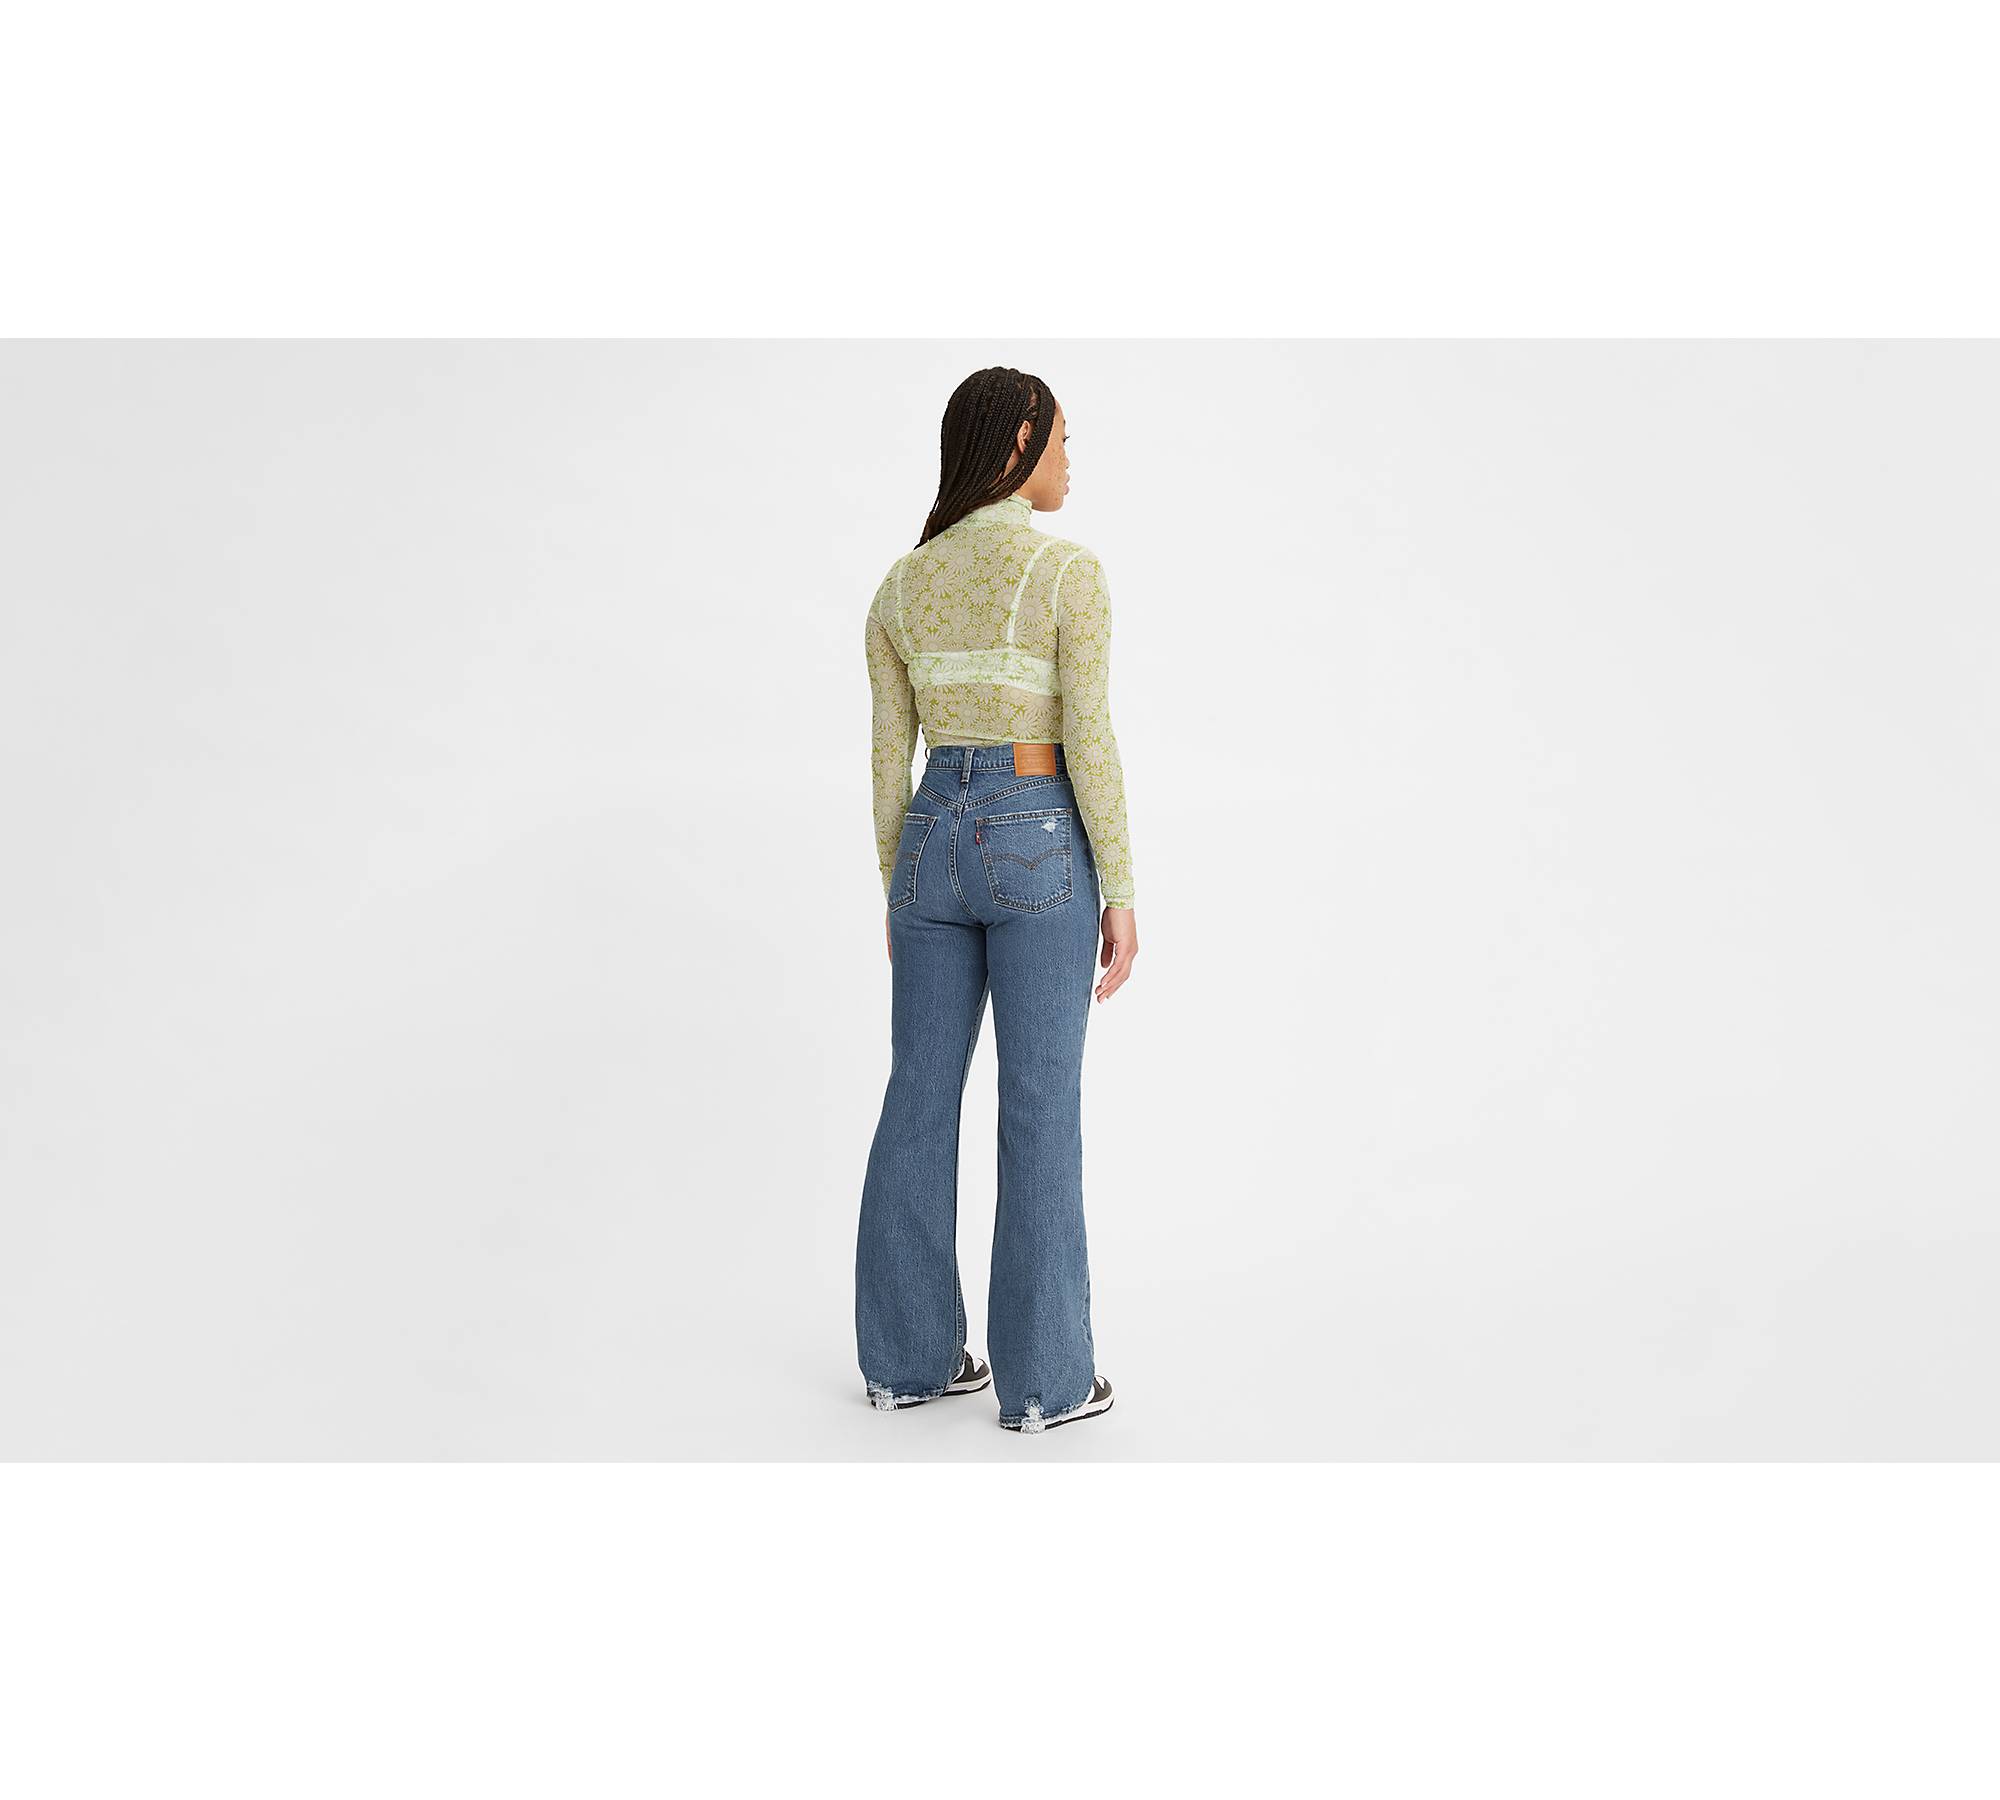 Up To 70% Off on Women's High Waist Flare Jean